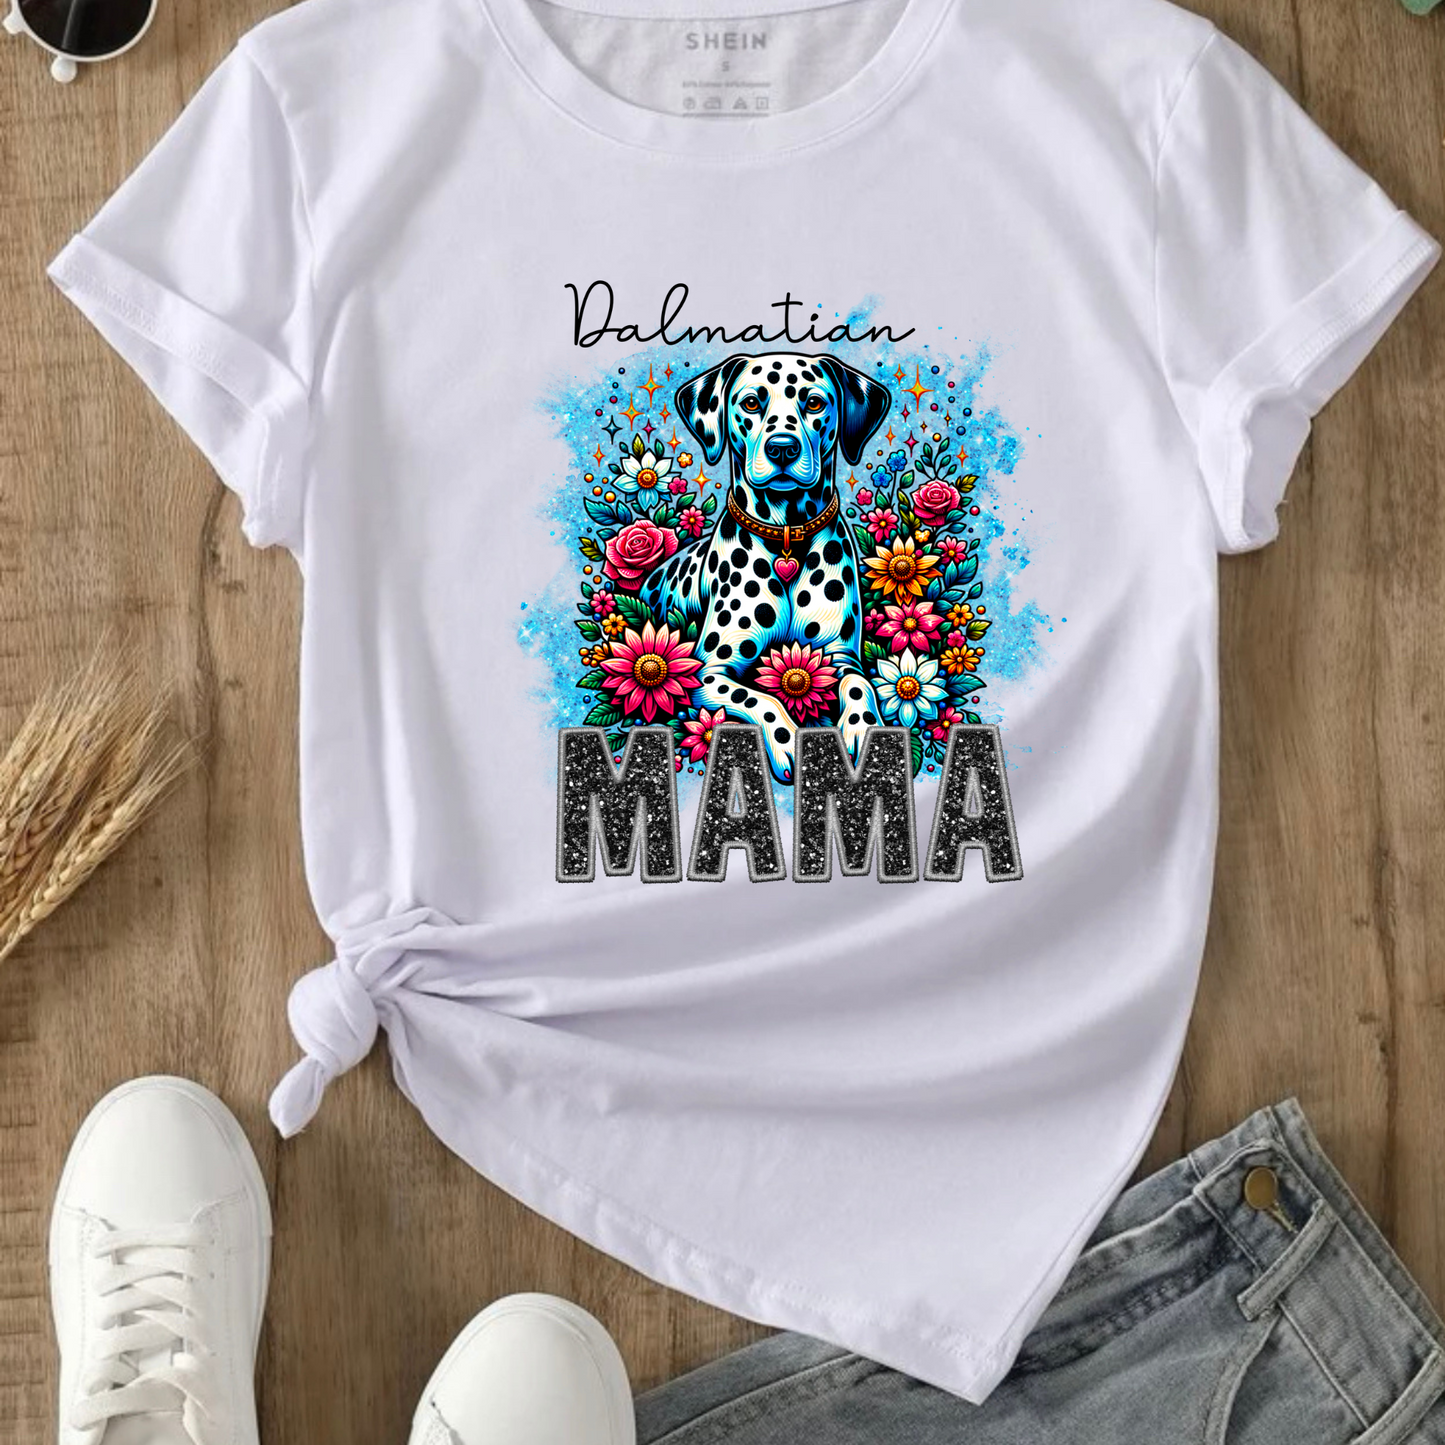 DALMATIAN MAMA DESIGN! YOU CHOOSE COLOR AND STYLE! TEE OR CREWNECK! BLEACHED OR NON-BLEACHED